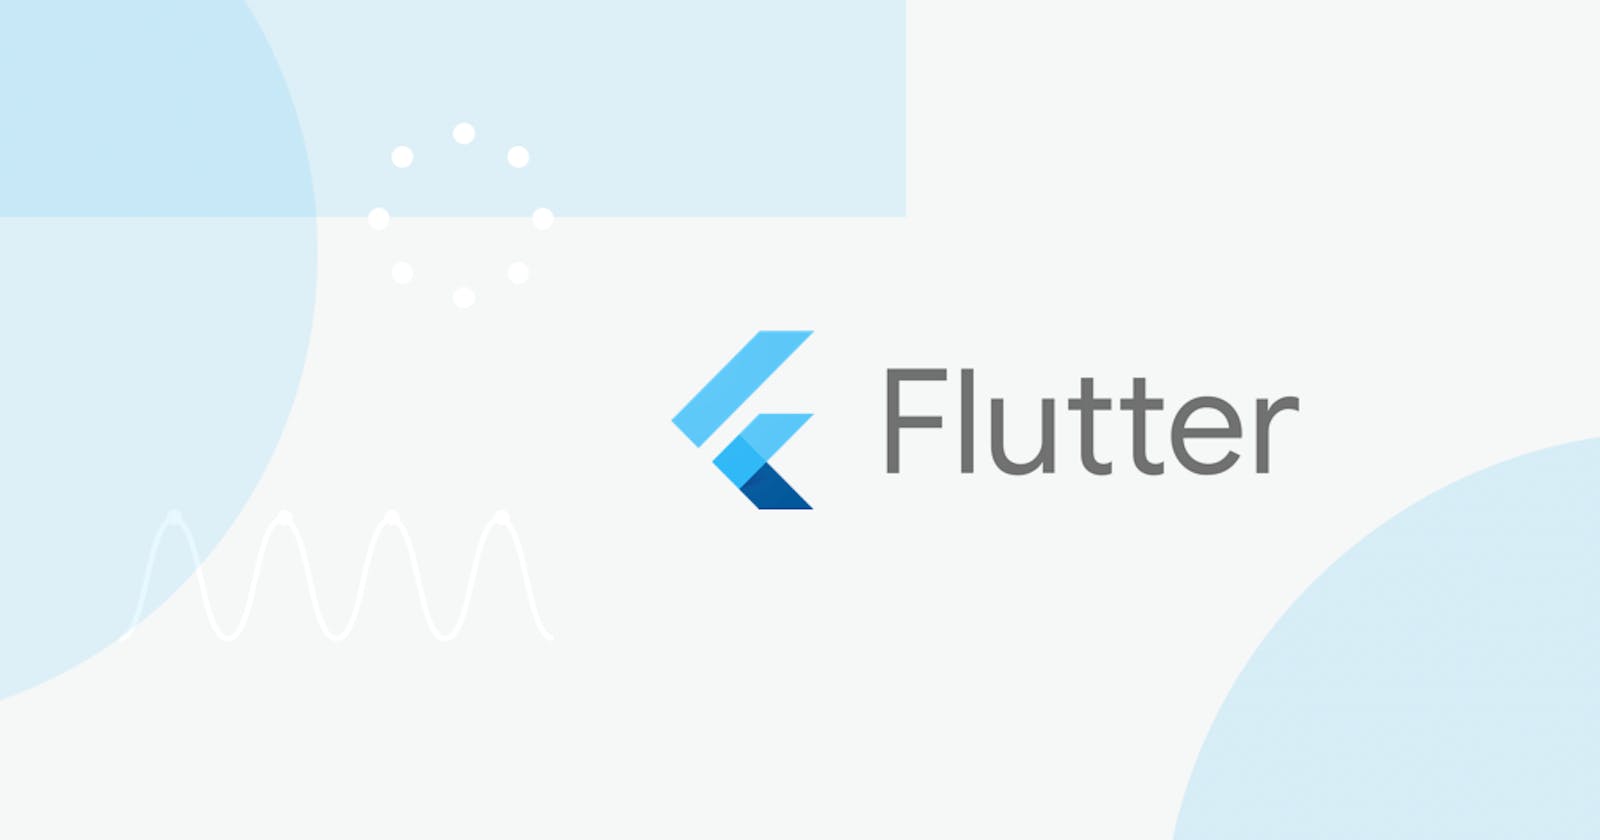 SO FLUTTER, YOU SAY, EIY?